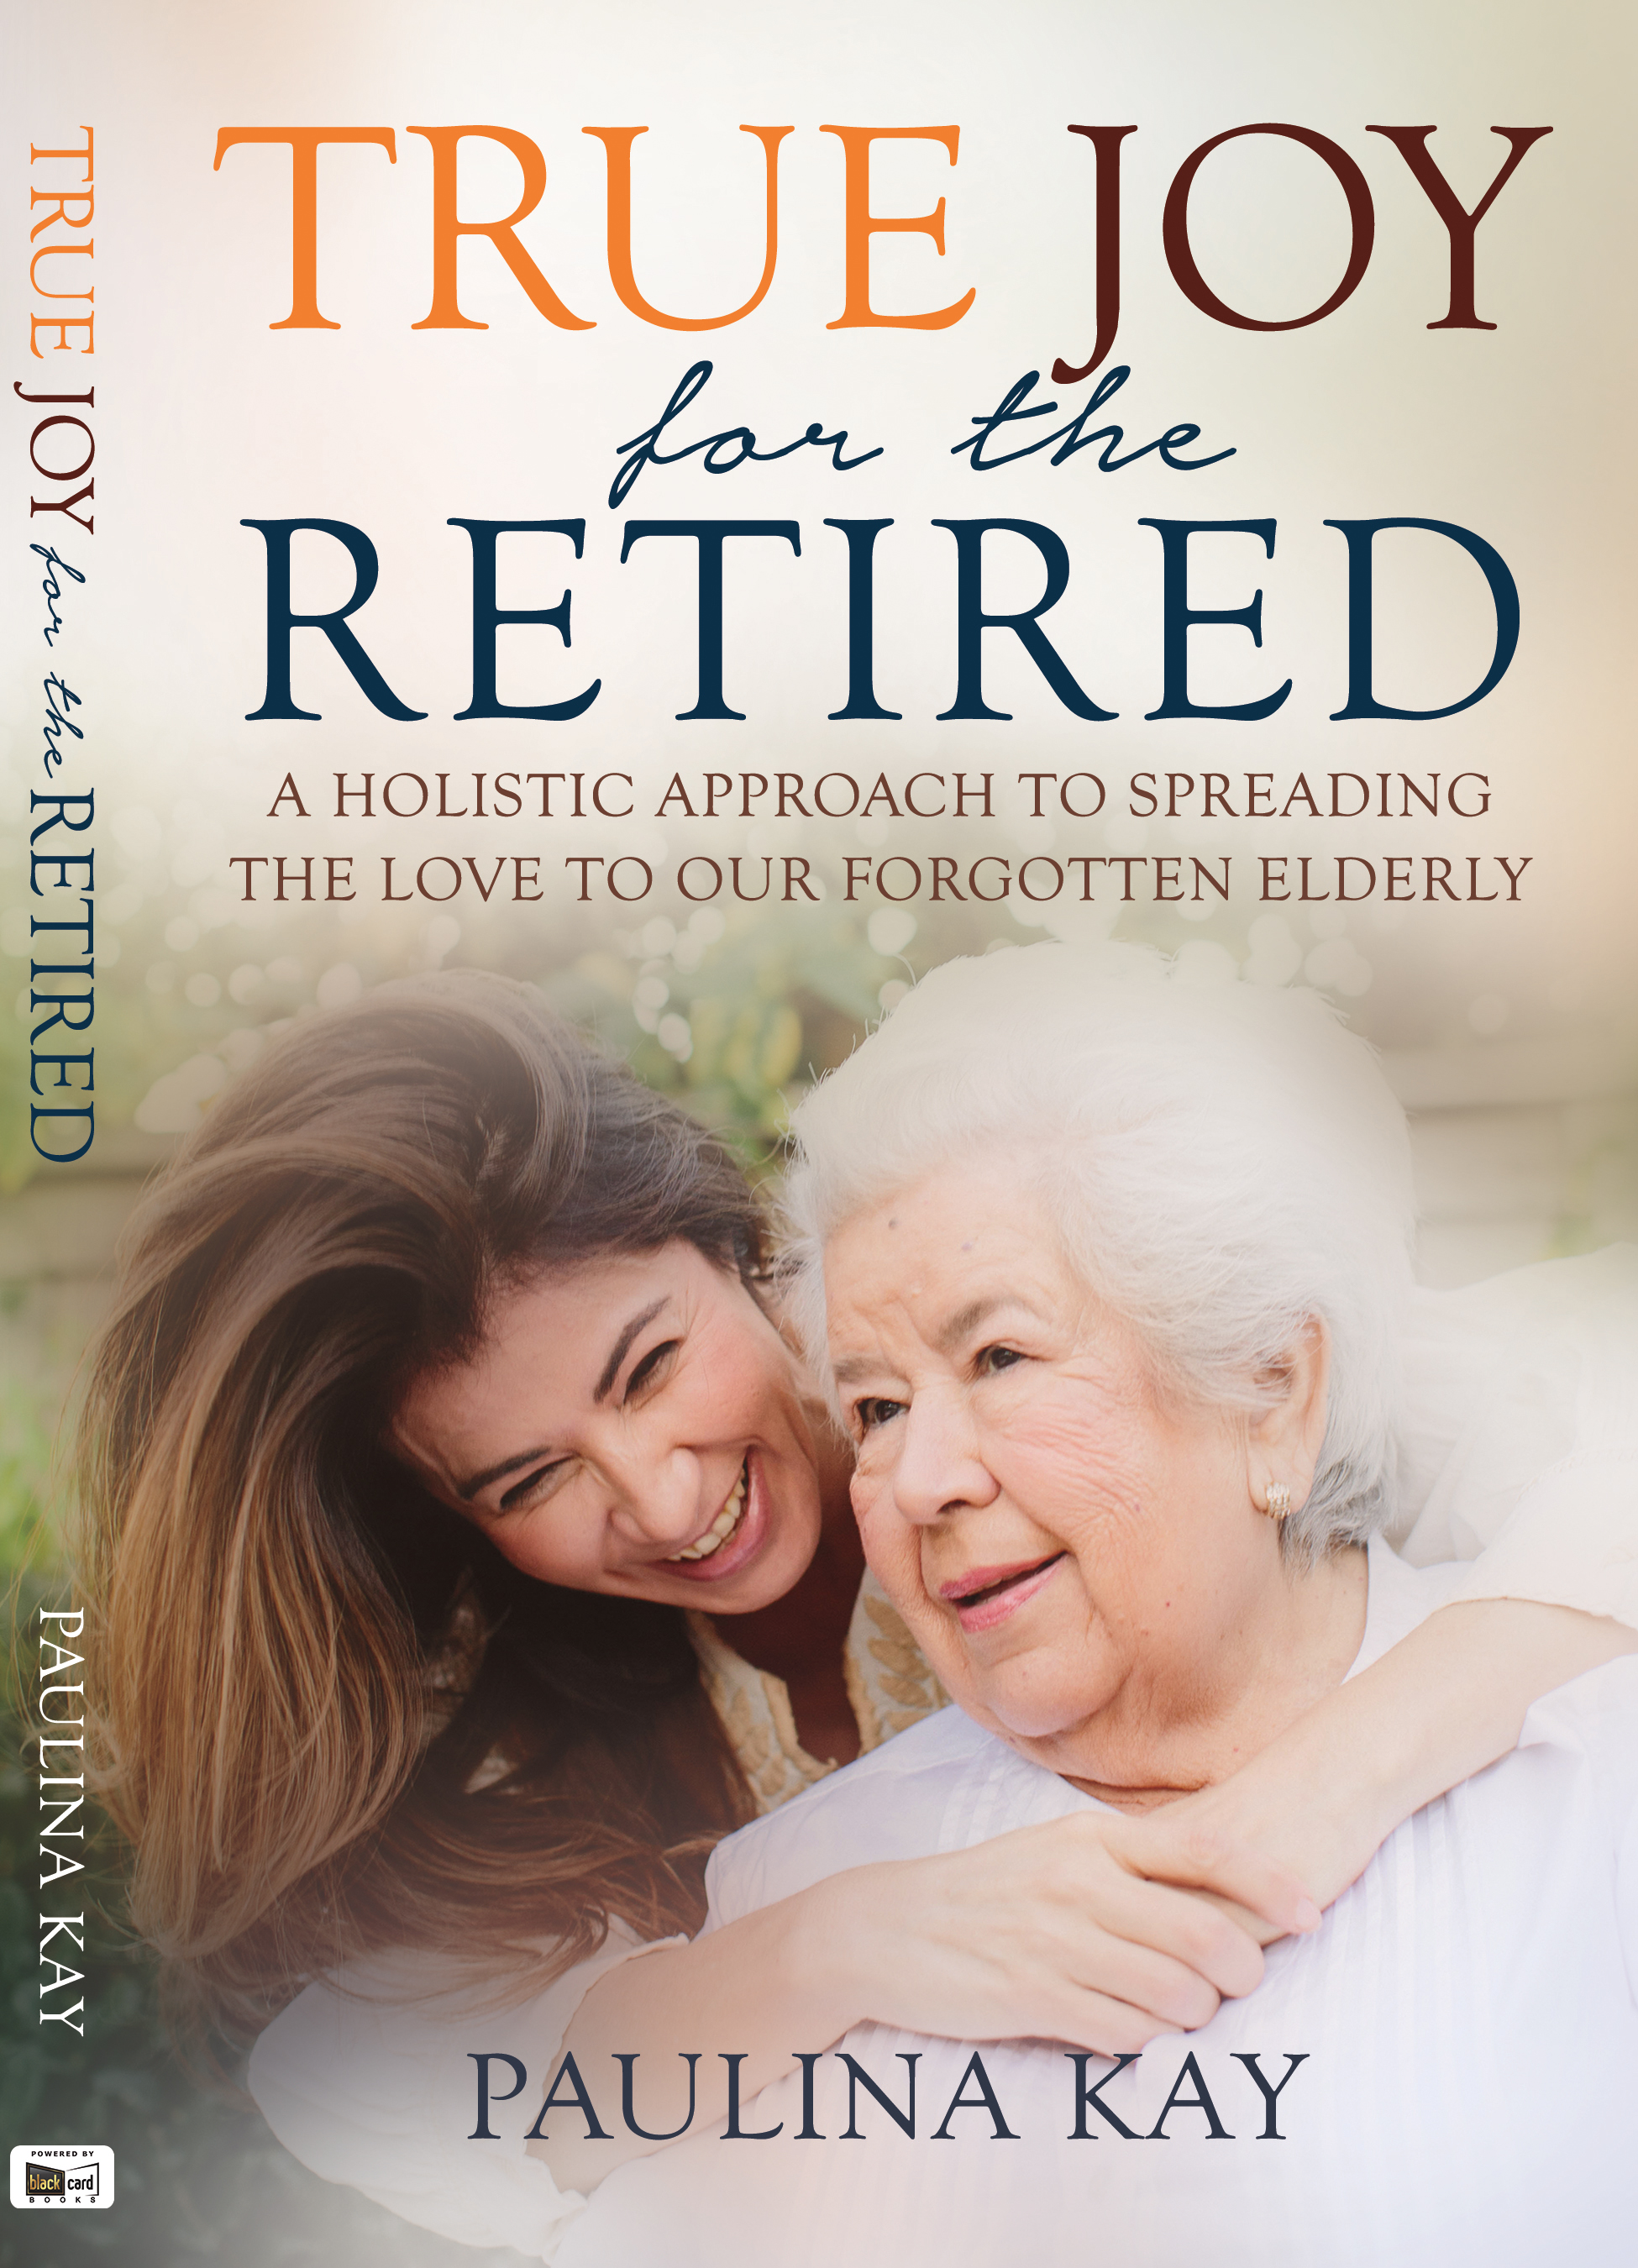 "True Joy for the Retired" - This Book Reveals a Major Breakthrough in Unleashing the Power of Appreciation, Love and Inclusion Between Generations